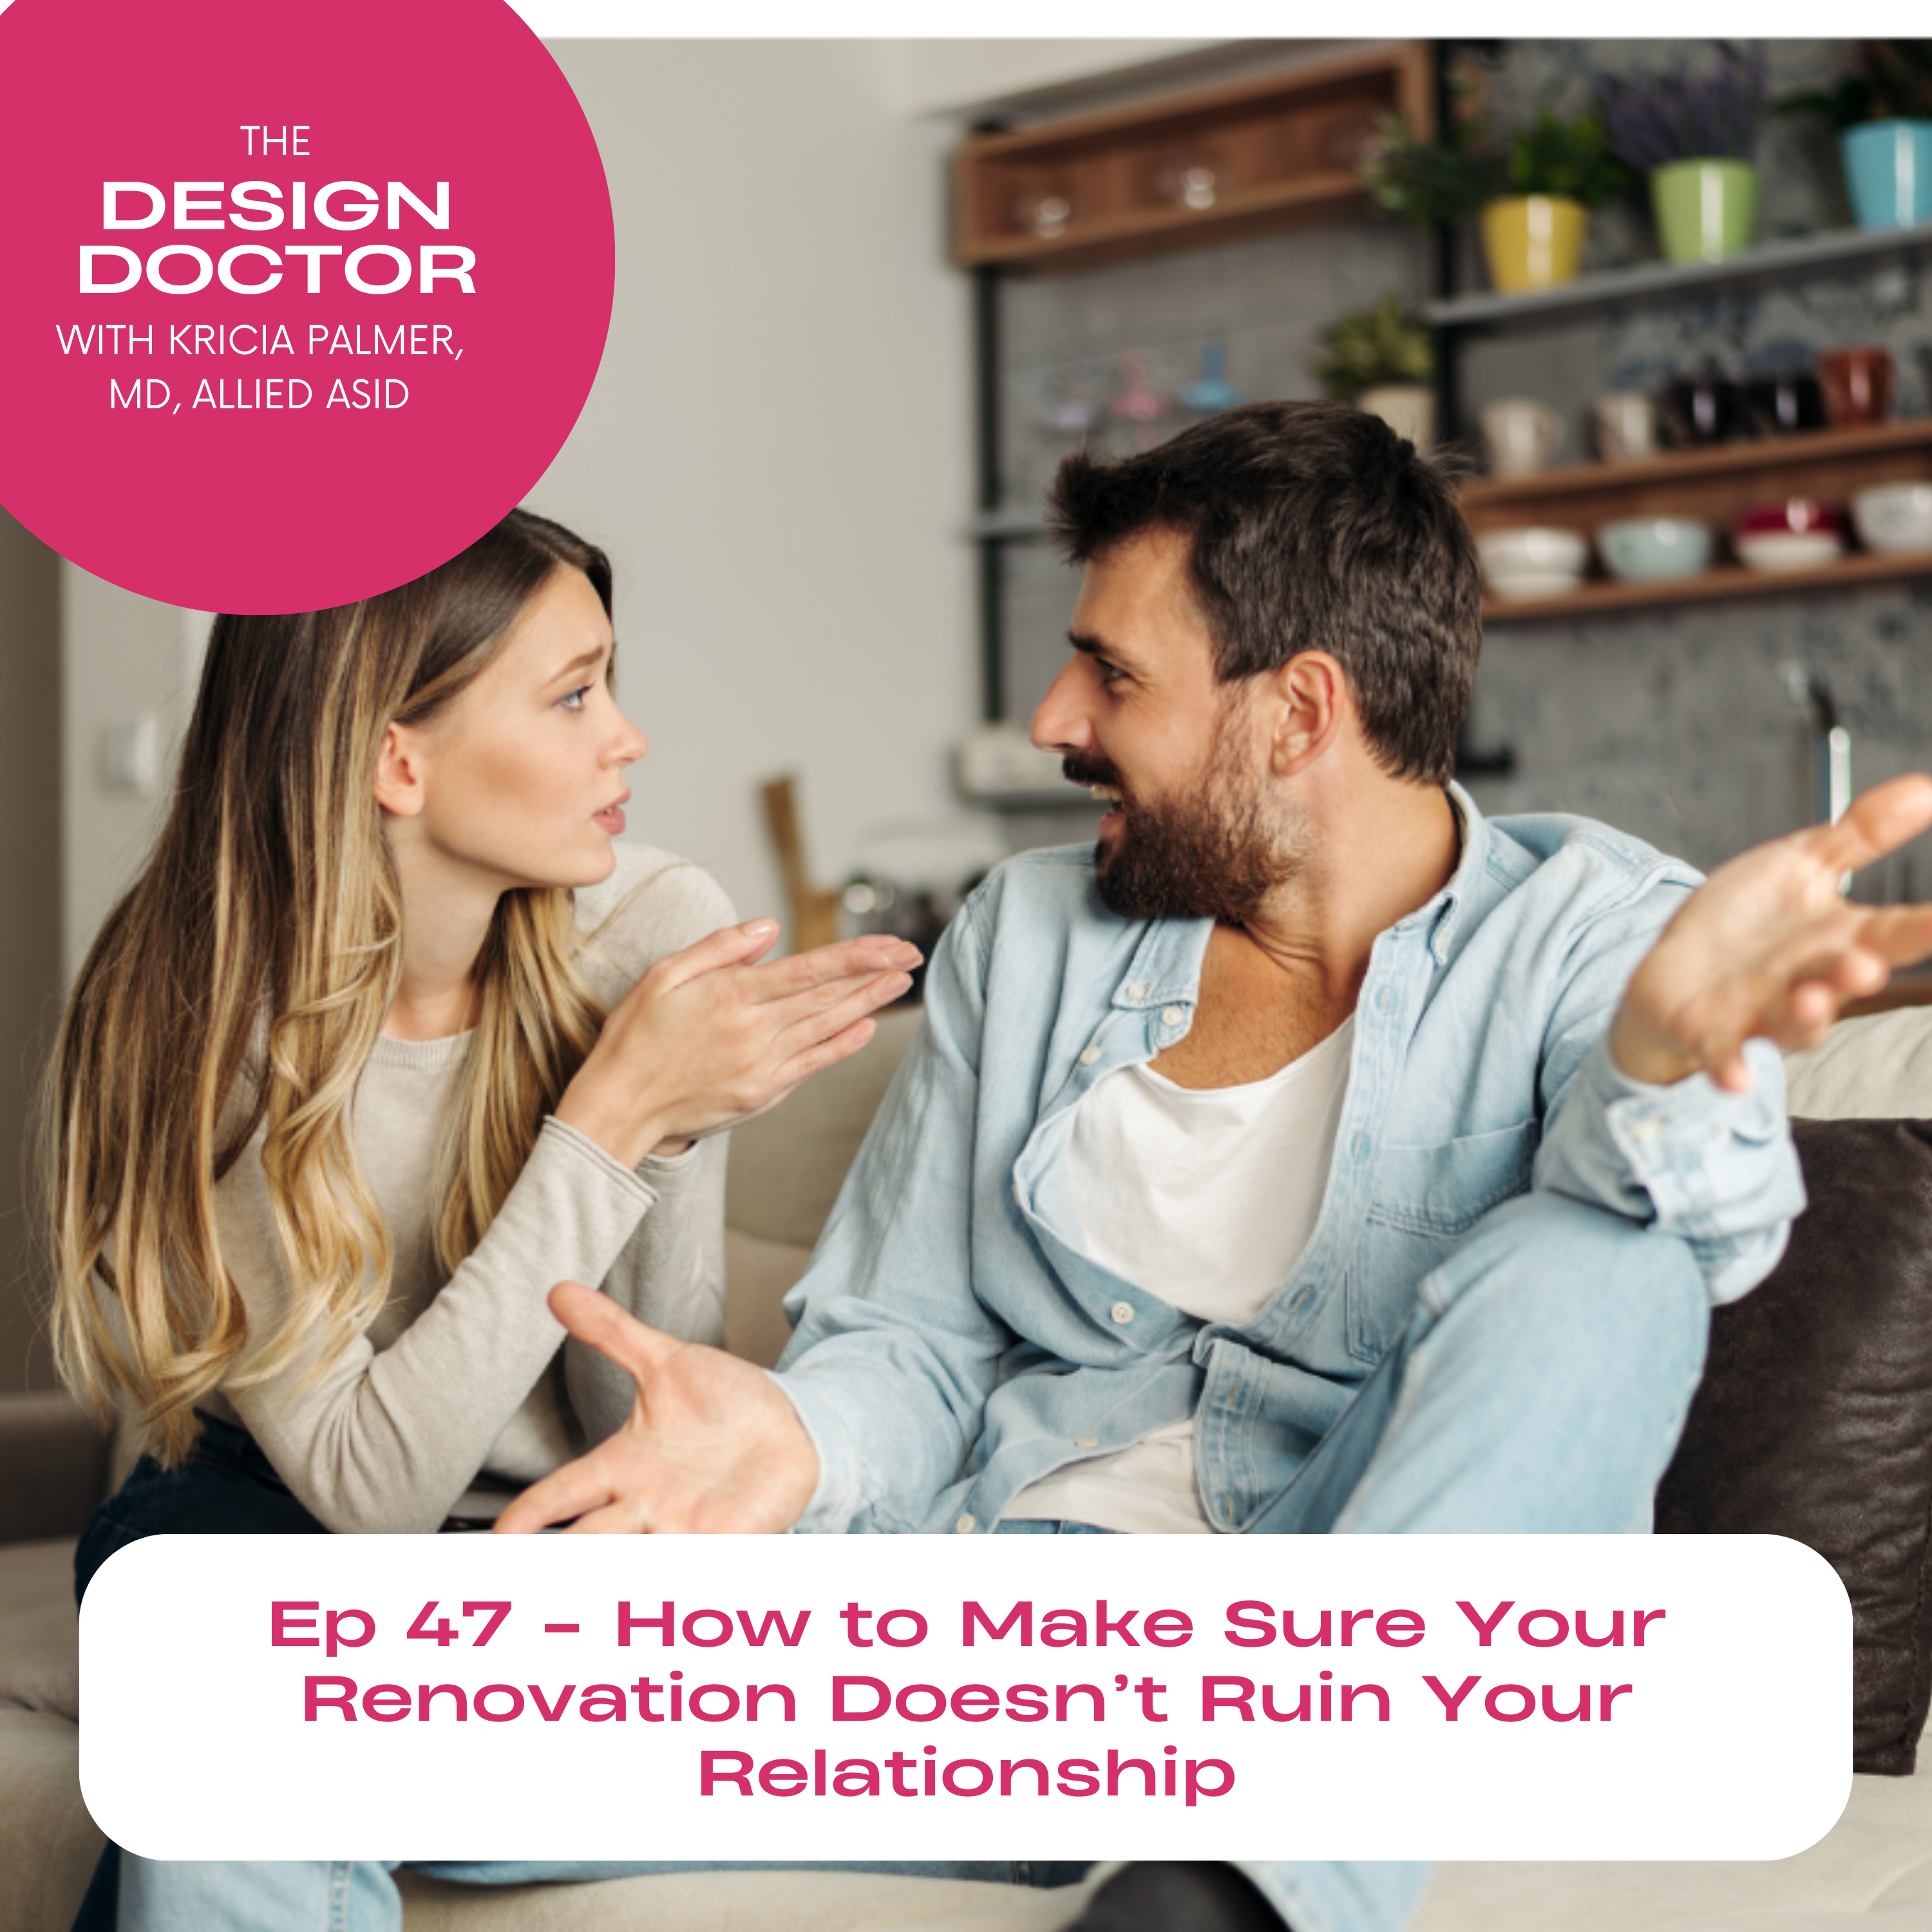 Episode 47 - How to Make Sure Your Renovation Doesn’t Ruin Your Relationship